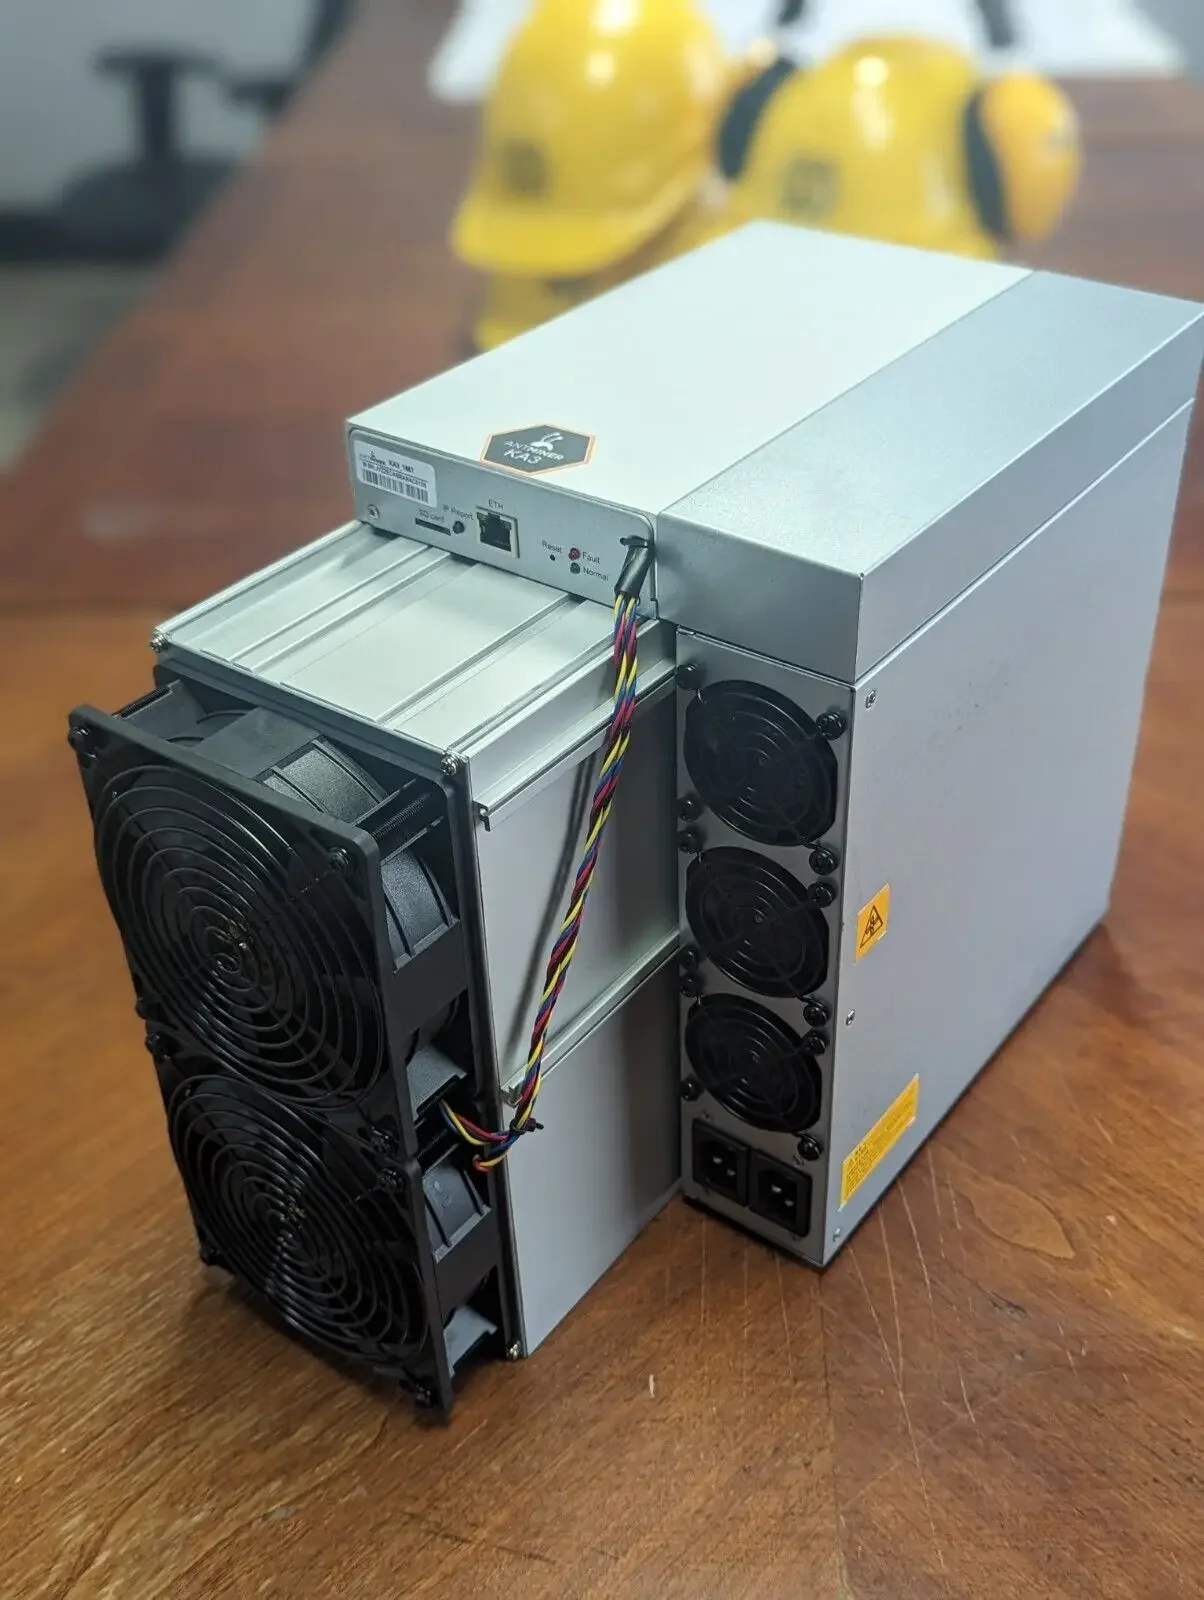 

Summer discount of 50% HOT SALES FOR BUY 3 GET 1 FREE New Antminer HS3 9Th/s 2070W HNS Miner